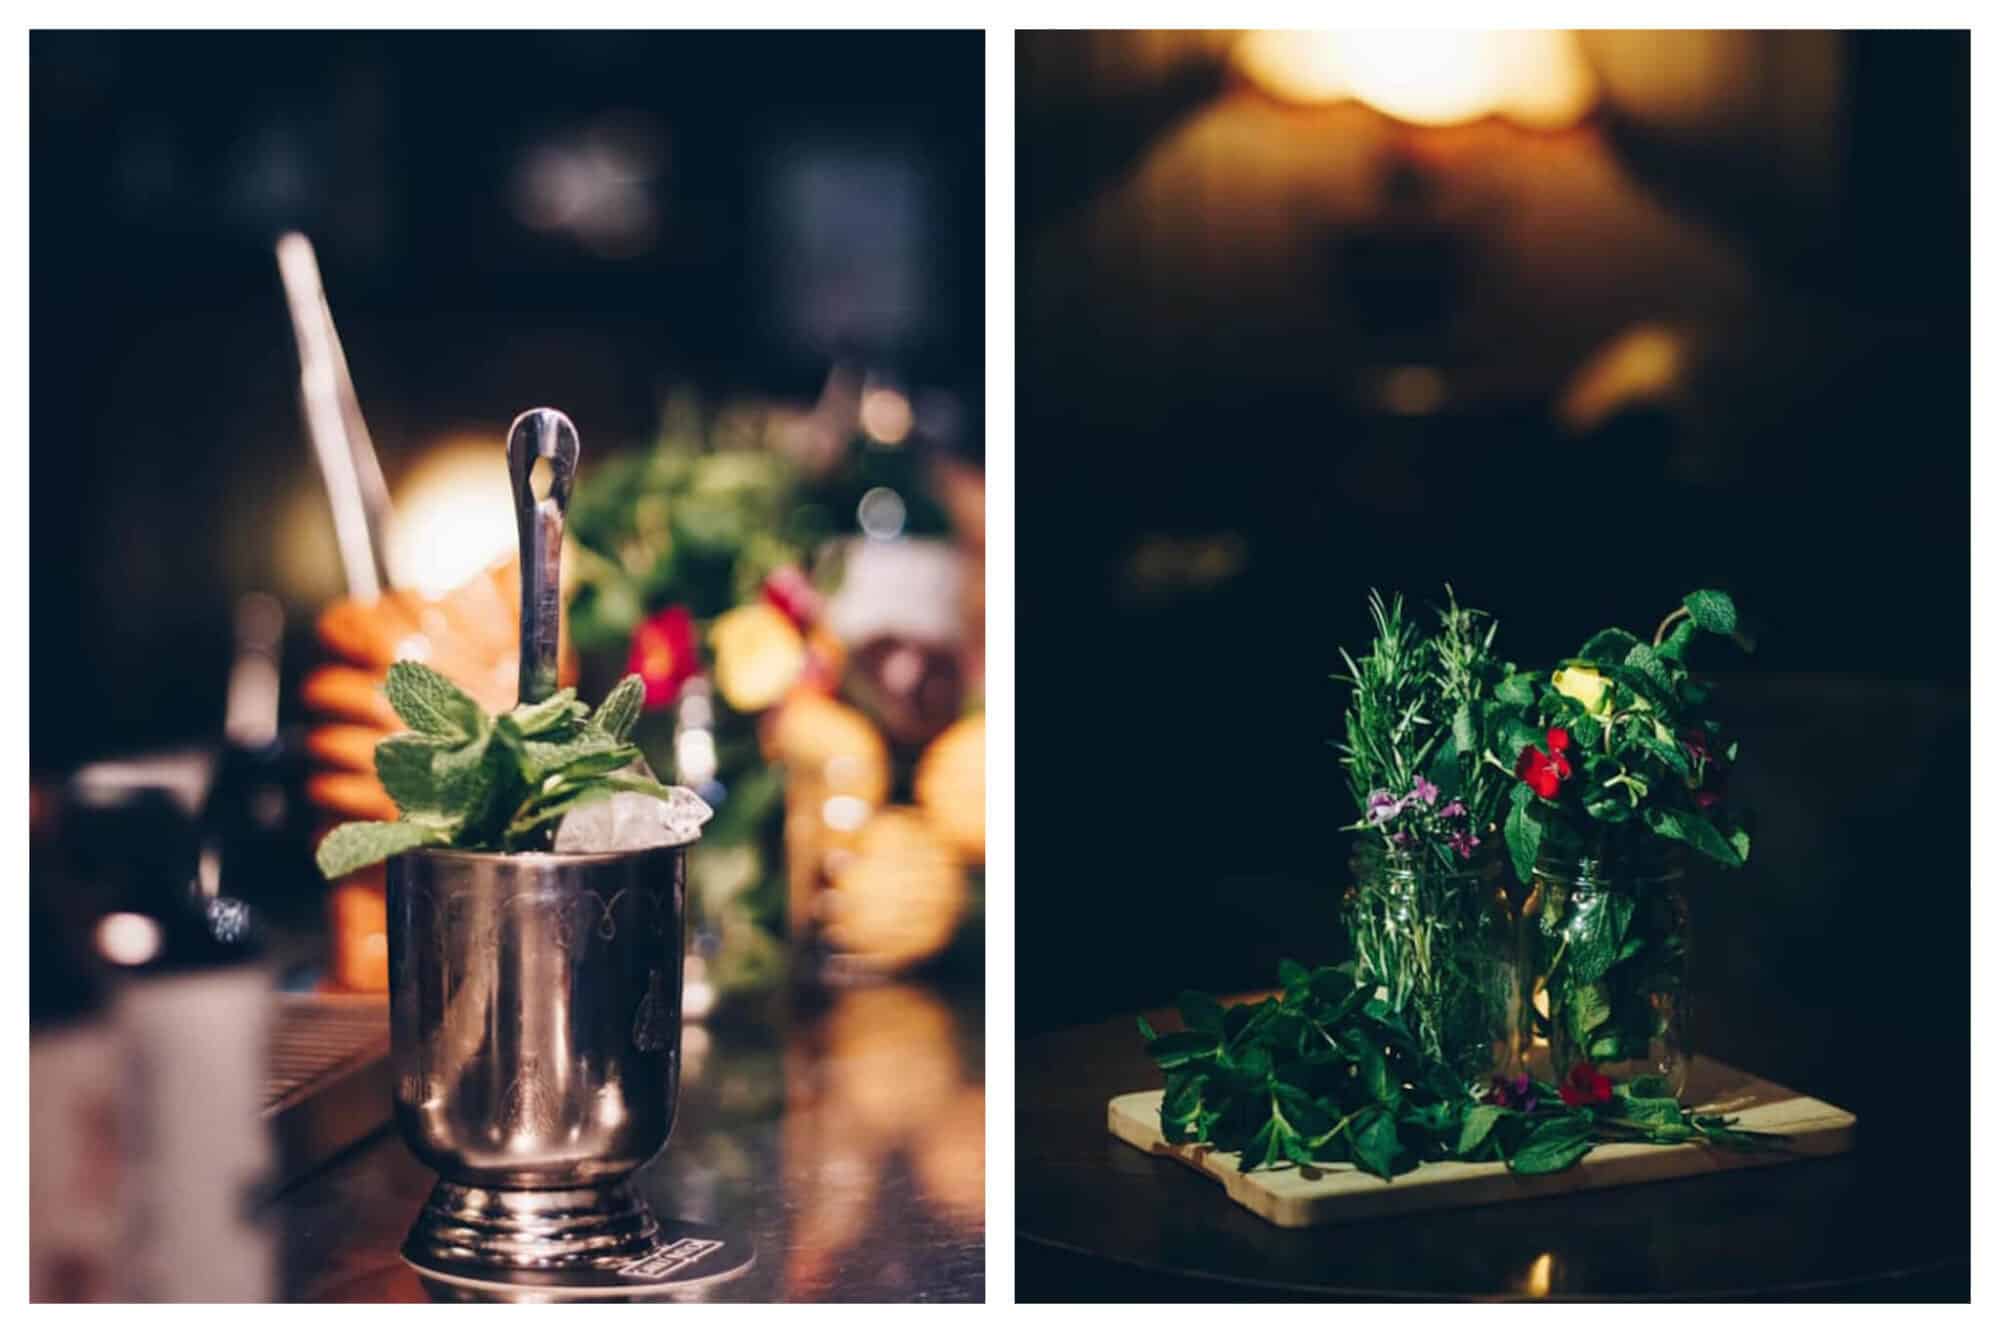 On the left an artfully placed metal cocktail tumbler with ice, a spoon and green garnish. On the right an extravagant cocktail glass with green leaves and red and purple flowers decorating it.
